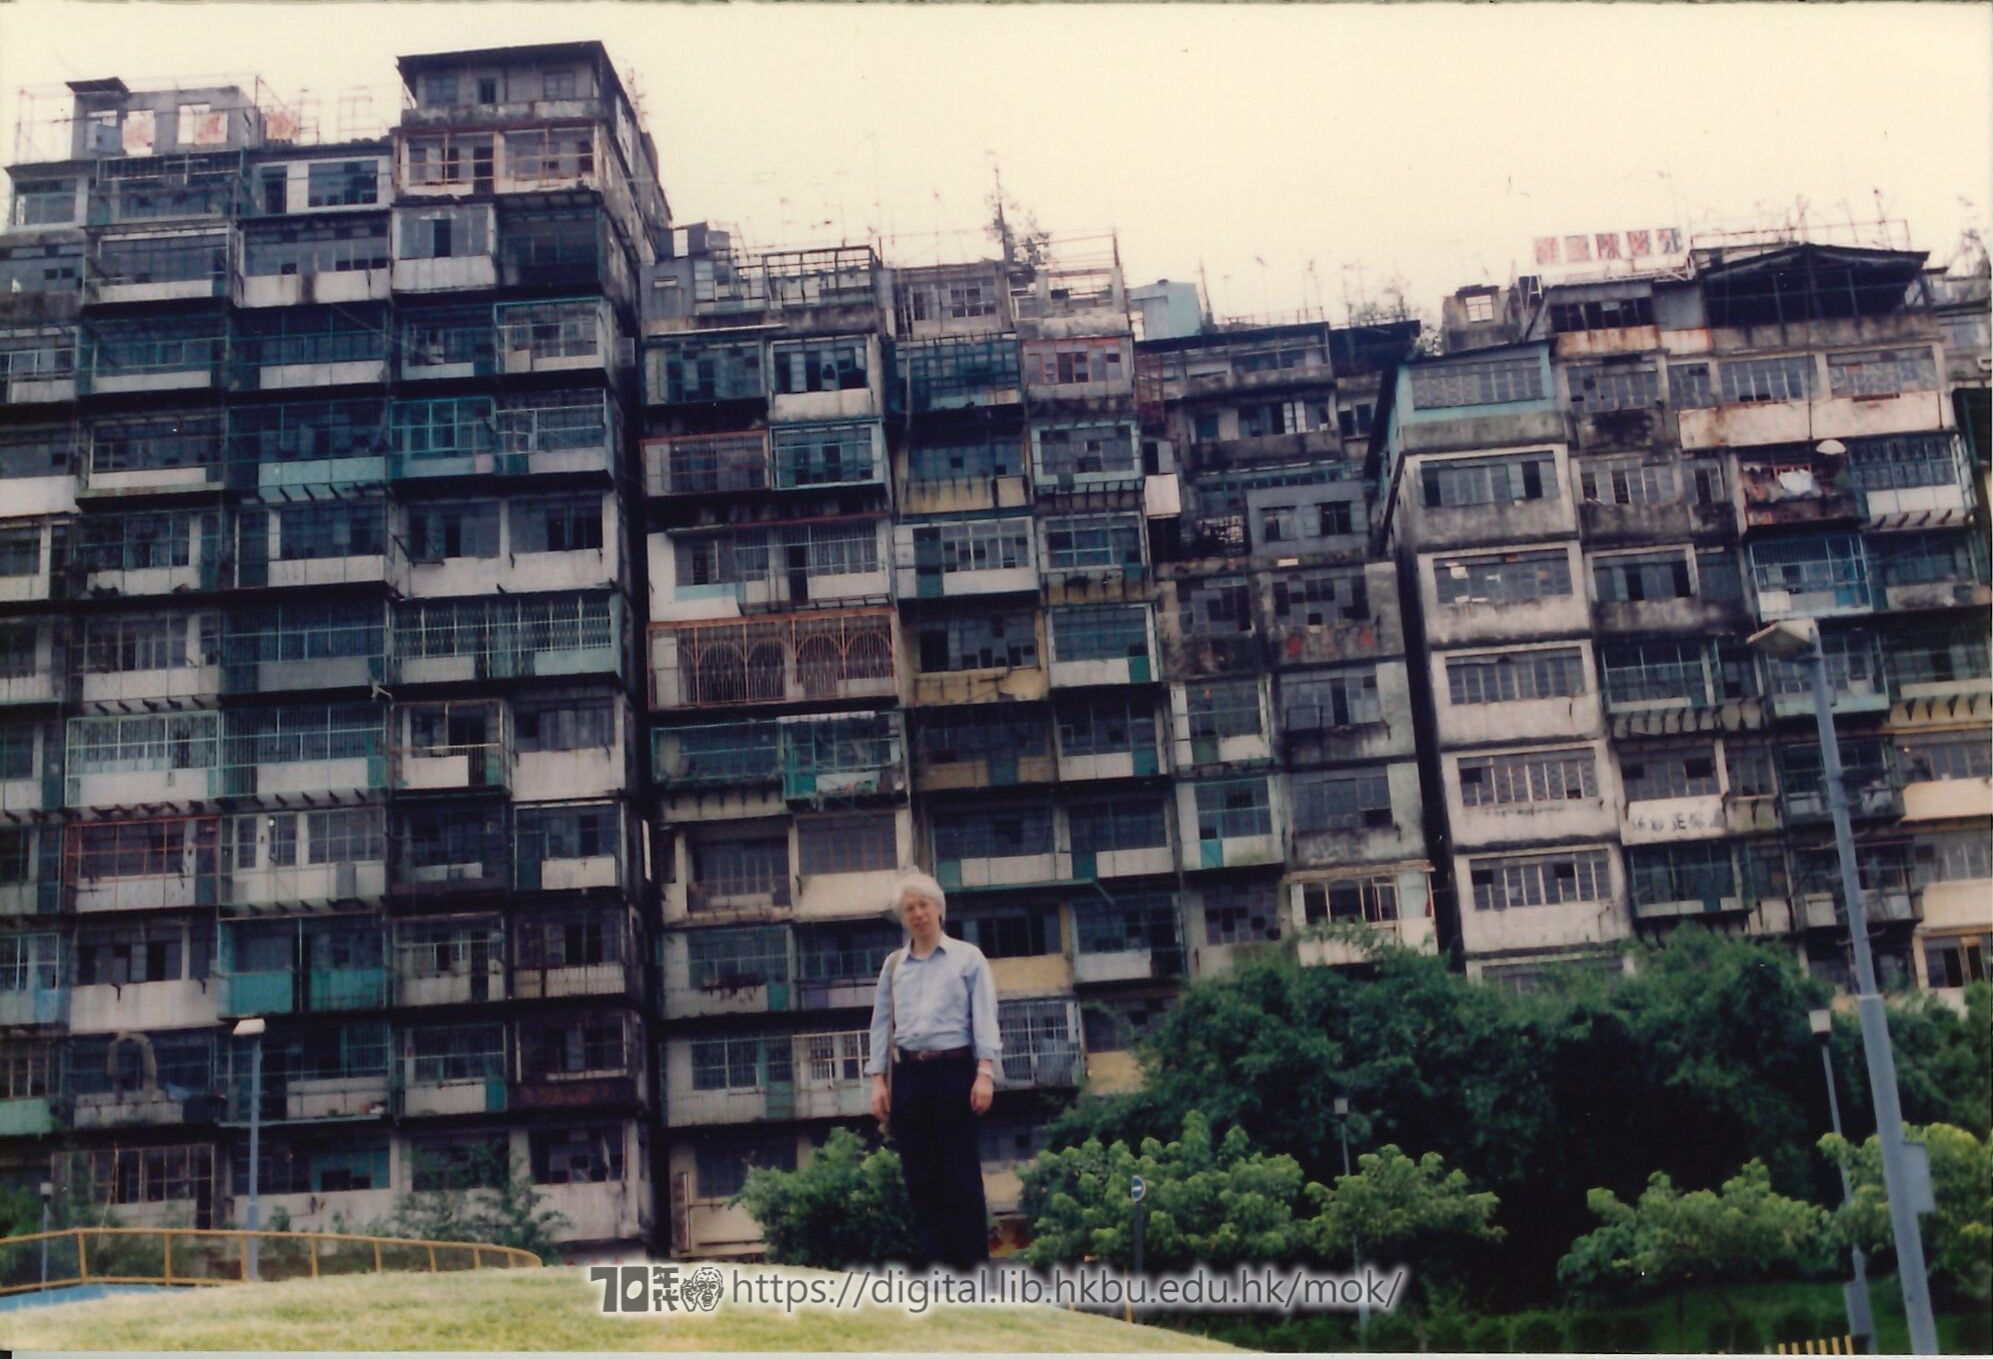   Gathering exhibits in Kowloon Walled City  